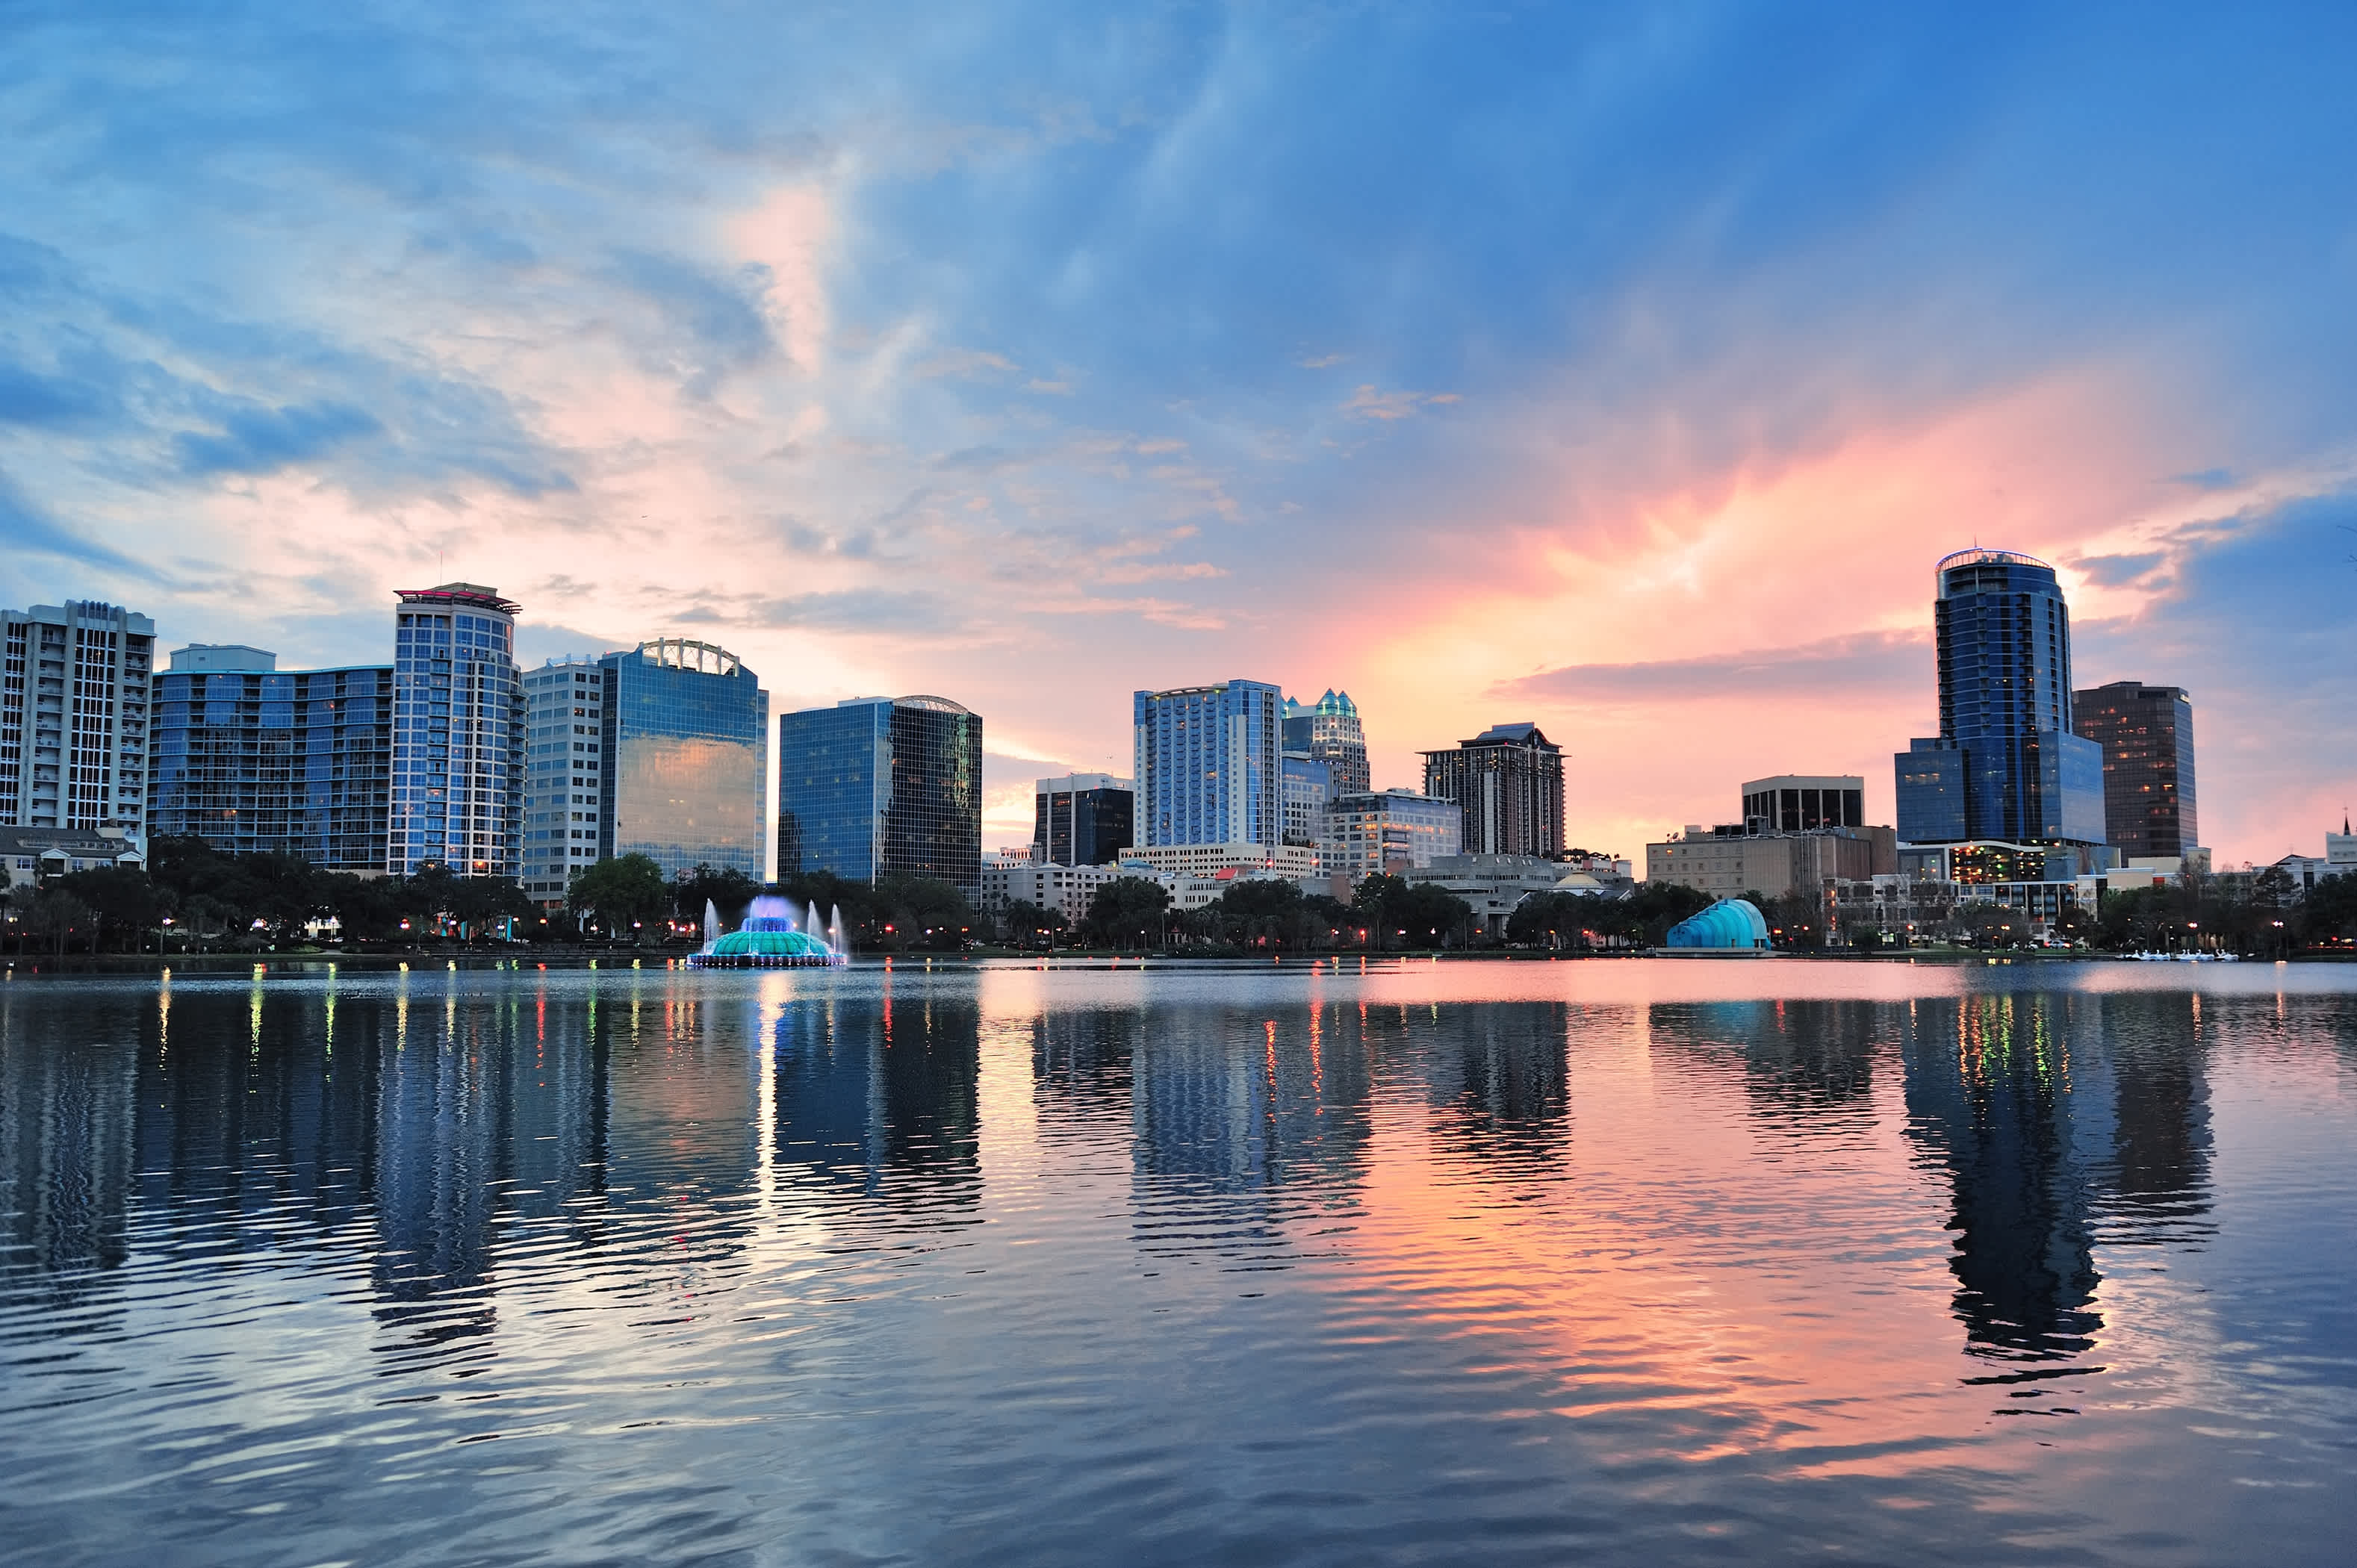 View of the Orlando skyline - to experience on an Orlando vacation